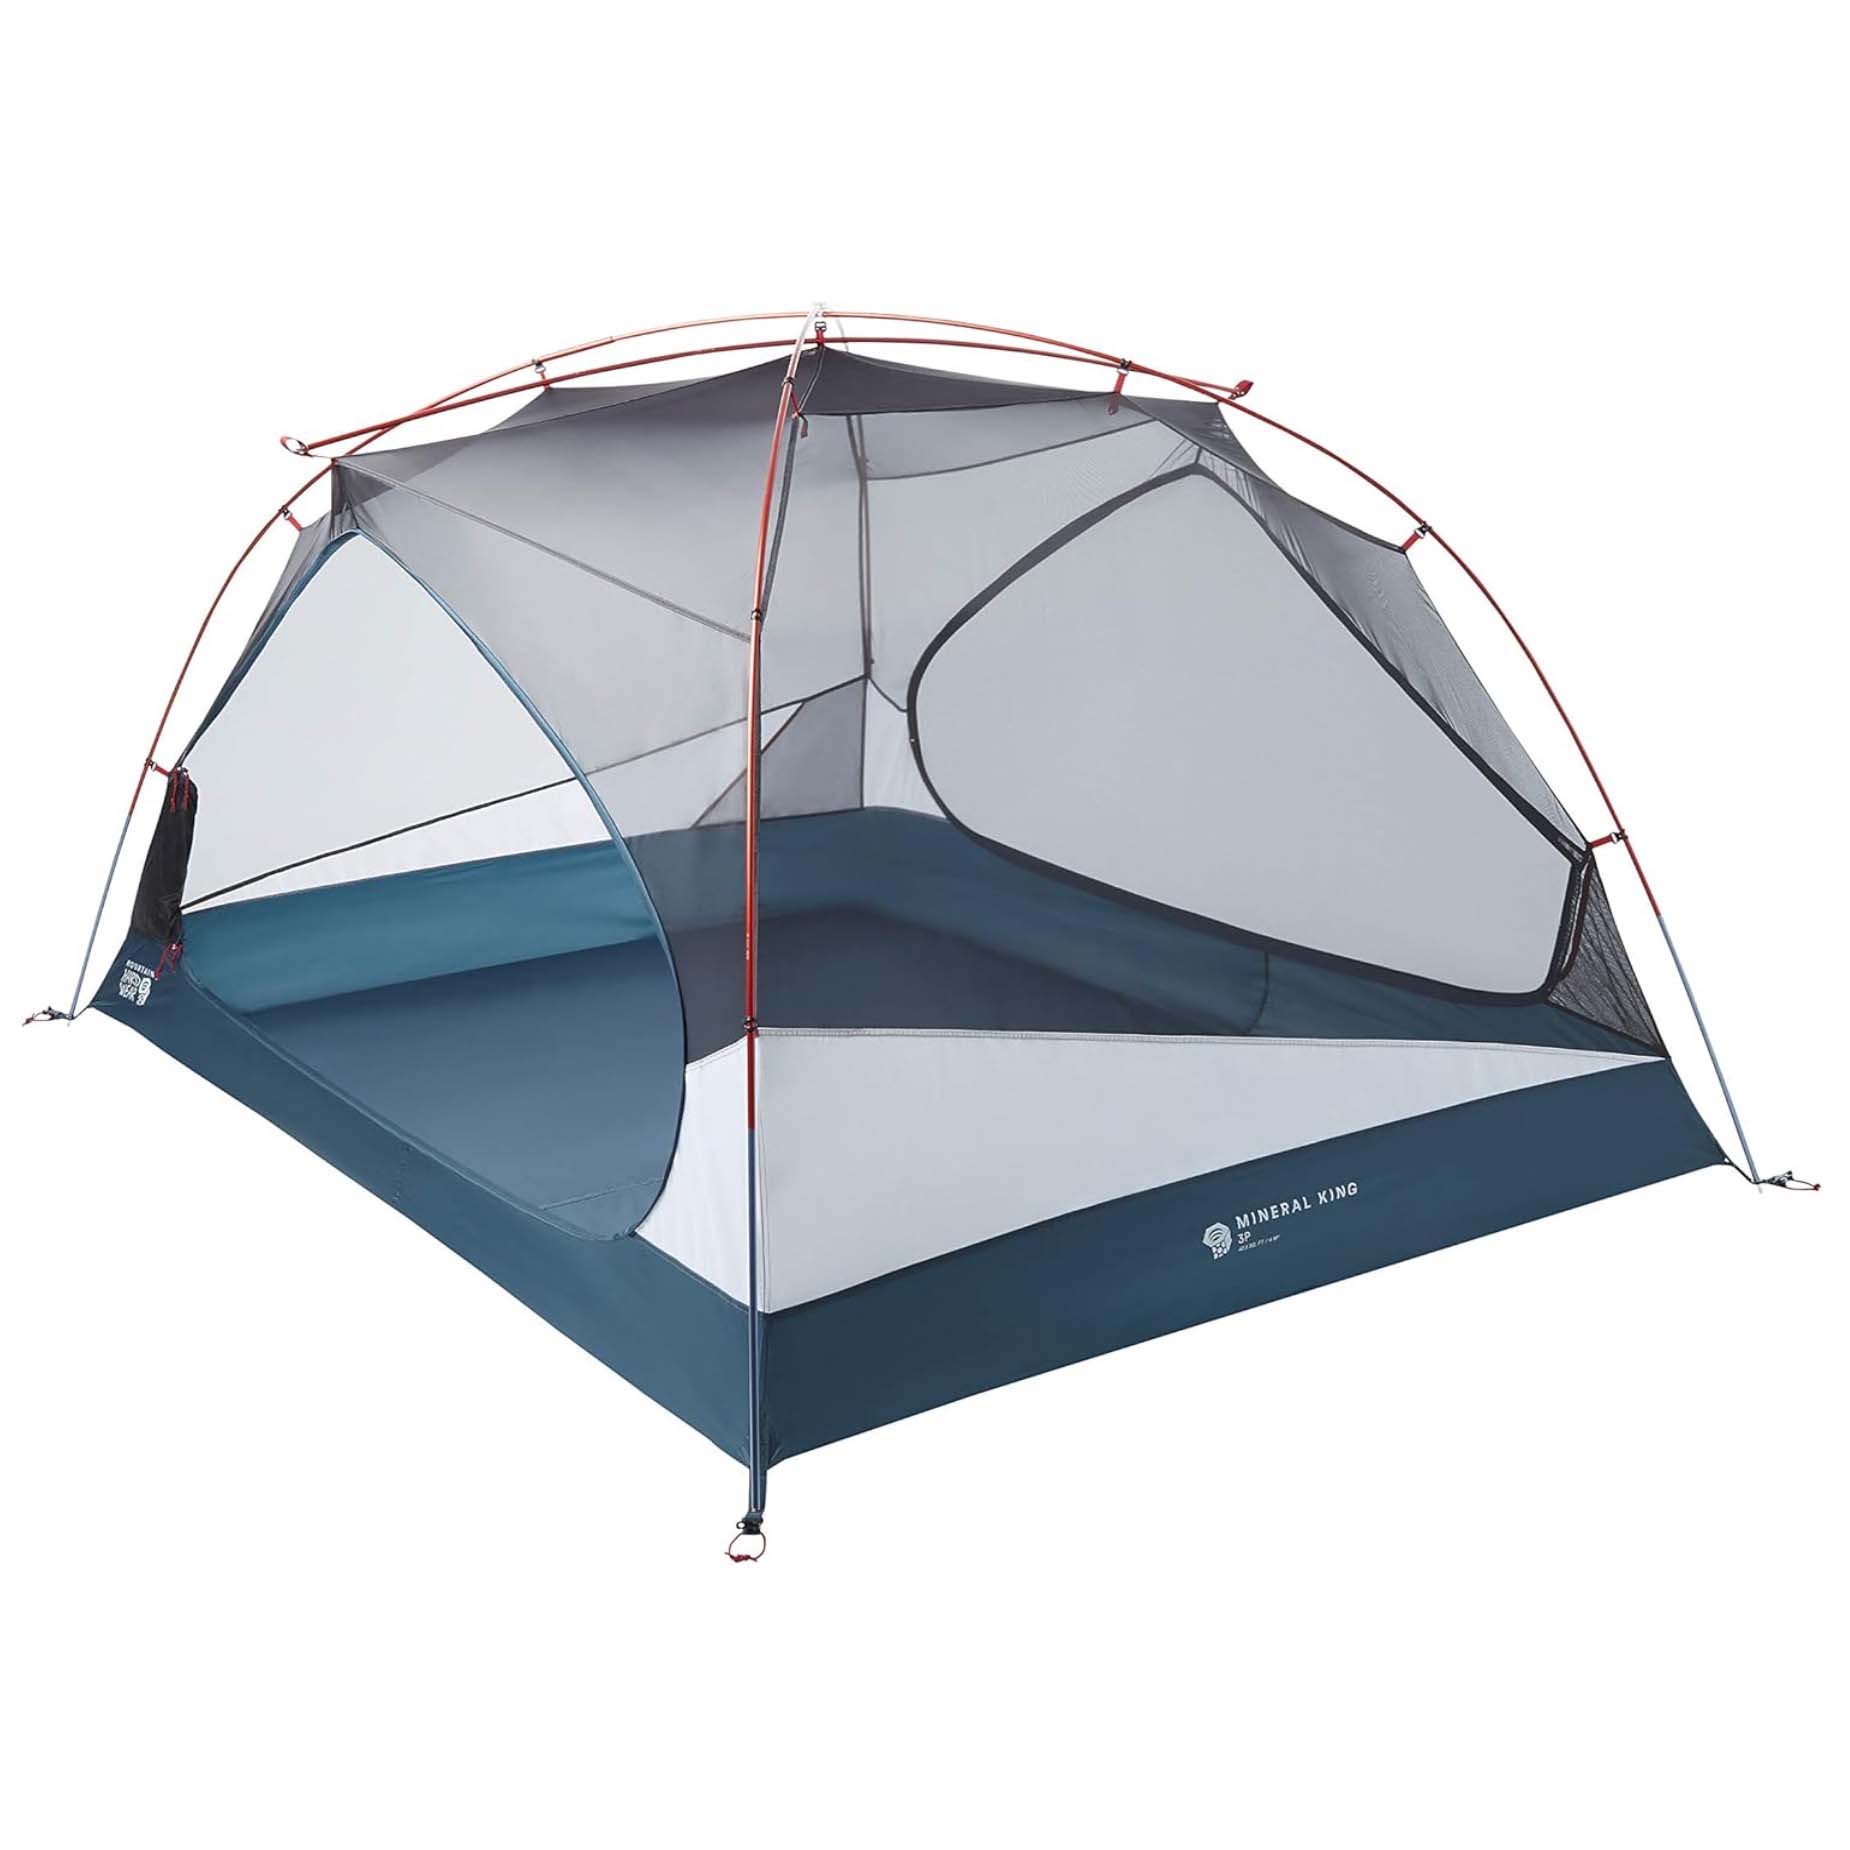 Dark blue and grey Mountain Hardwear Mineral King 3 Tent